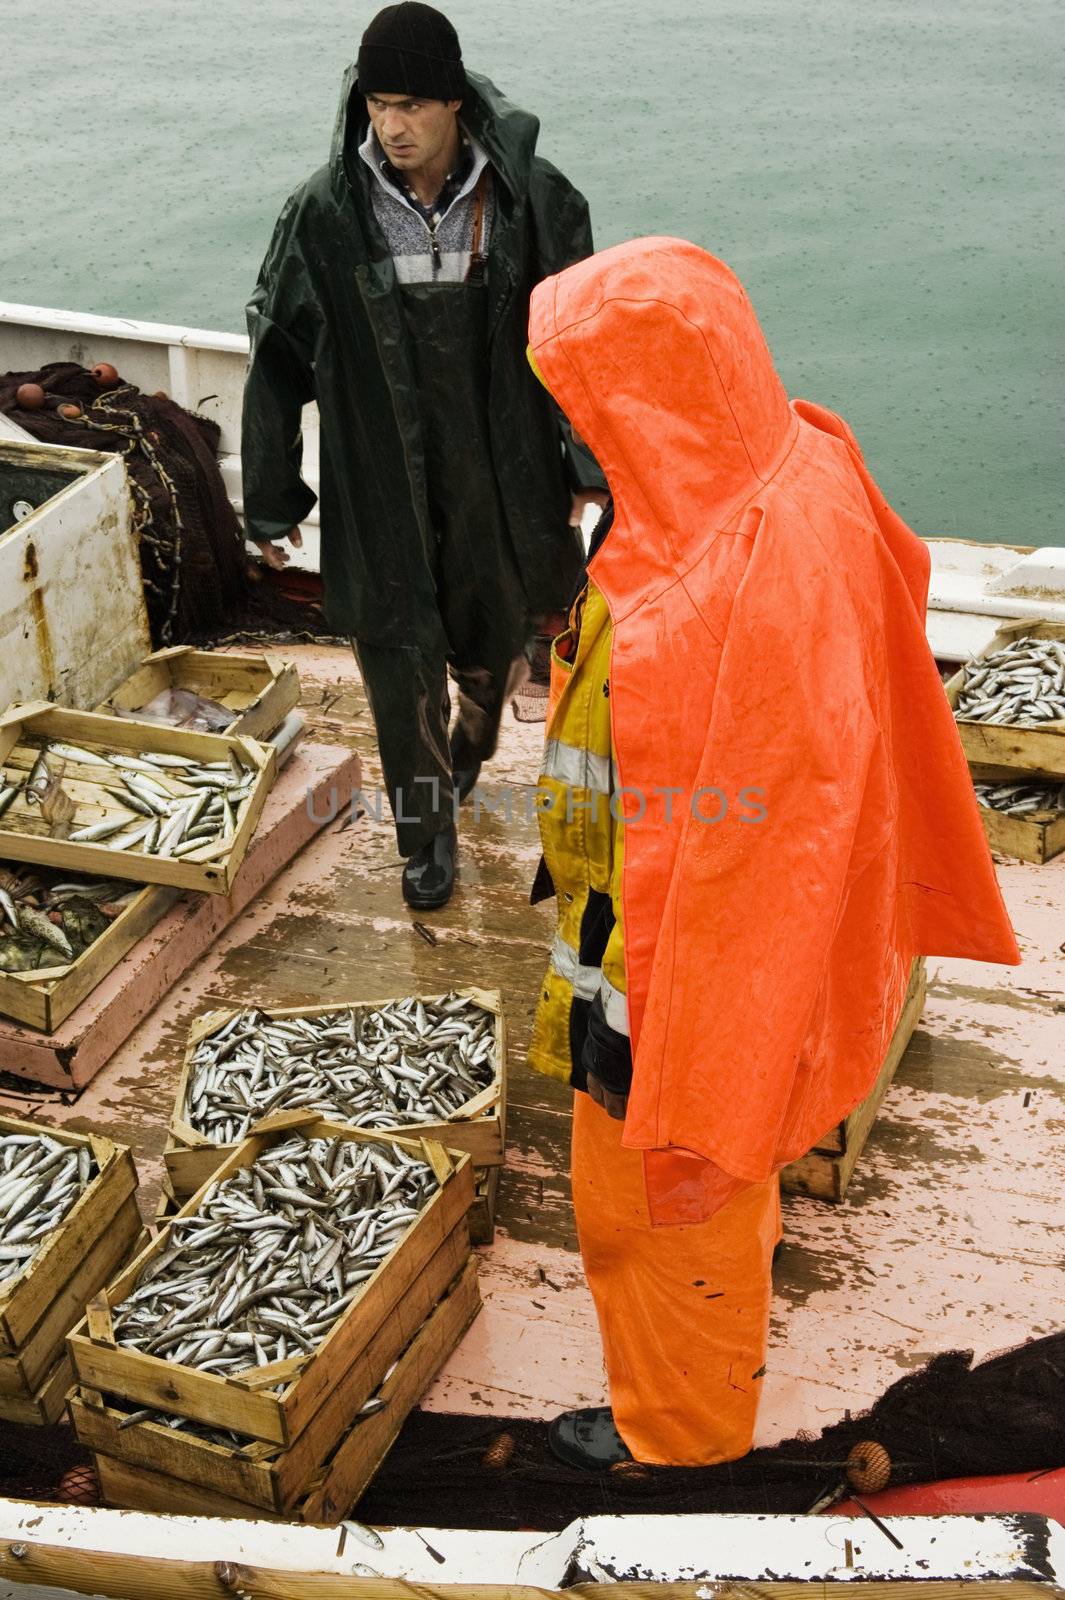 Picture shows two fishermen on a trawler boat in a rainy winter day